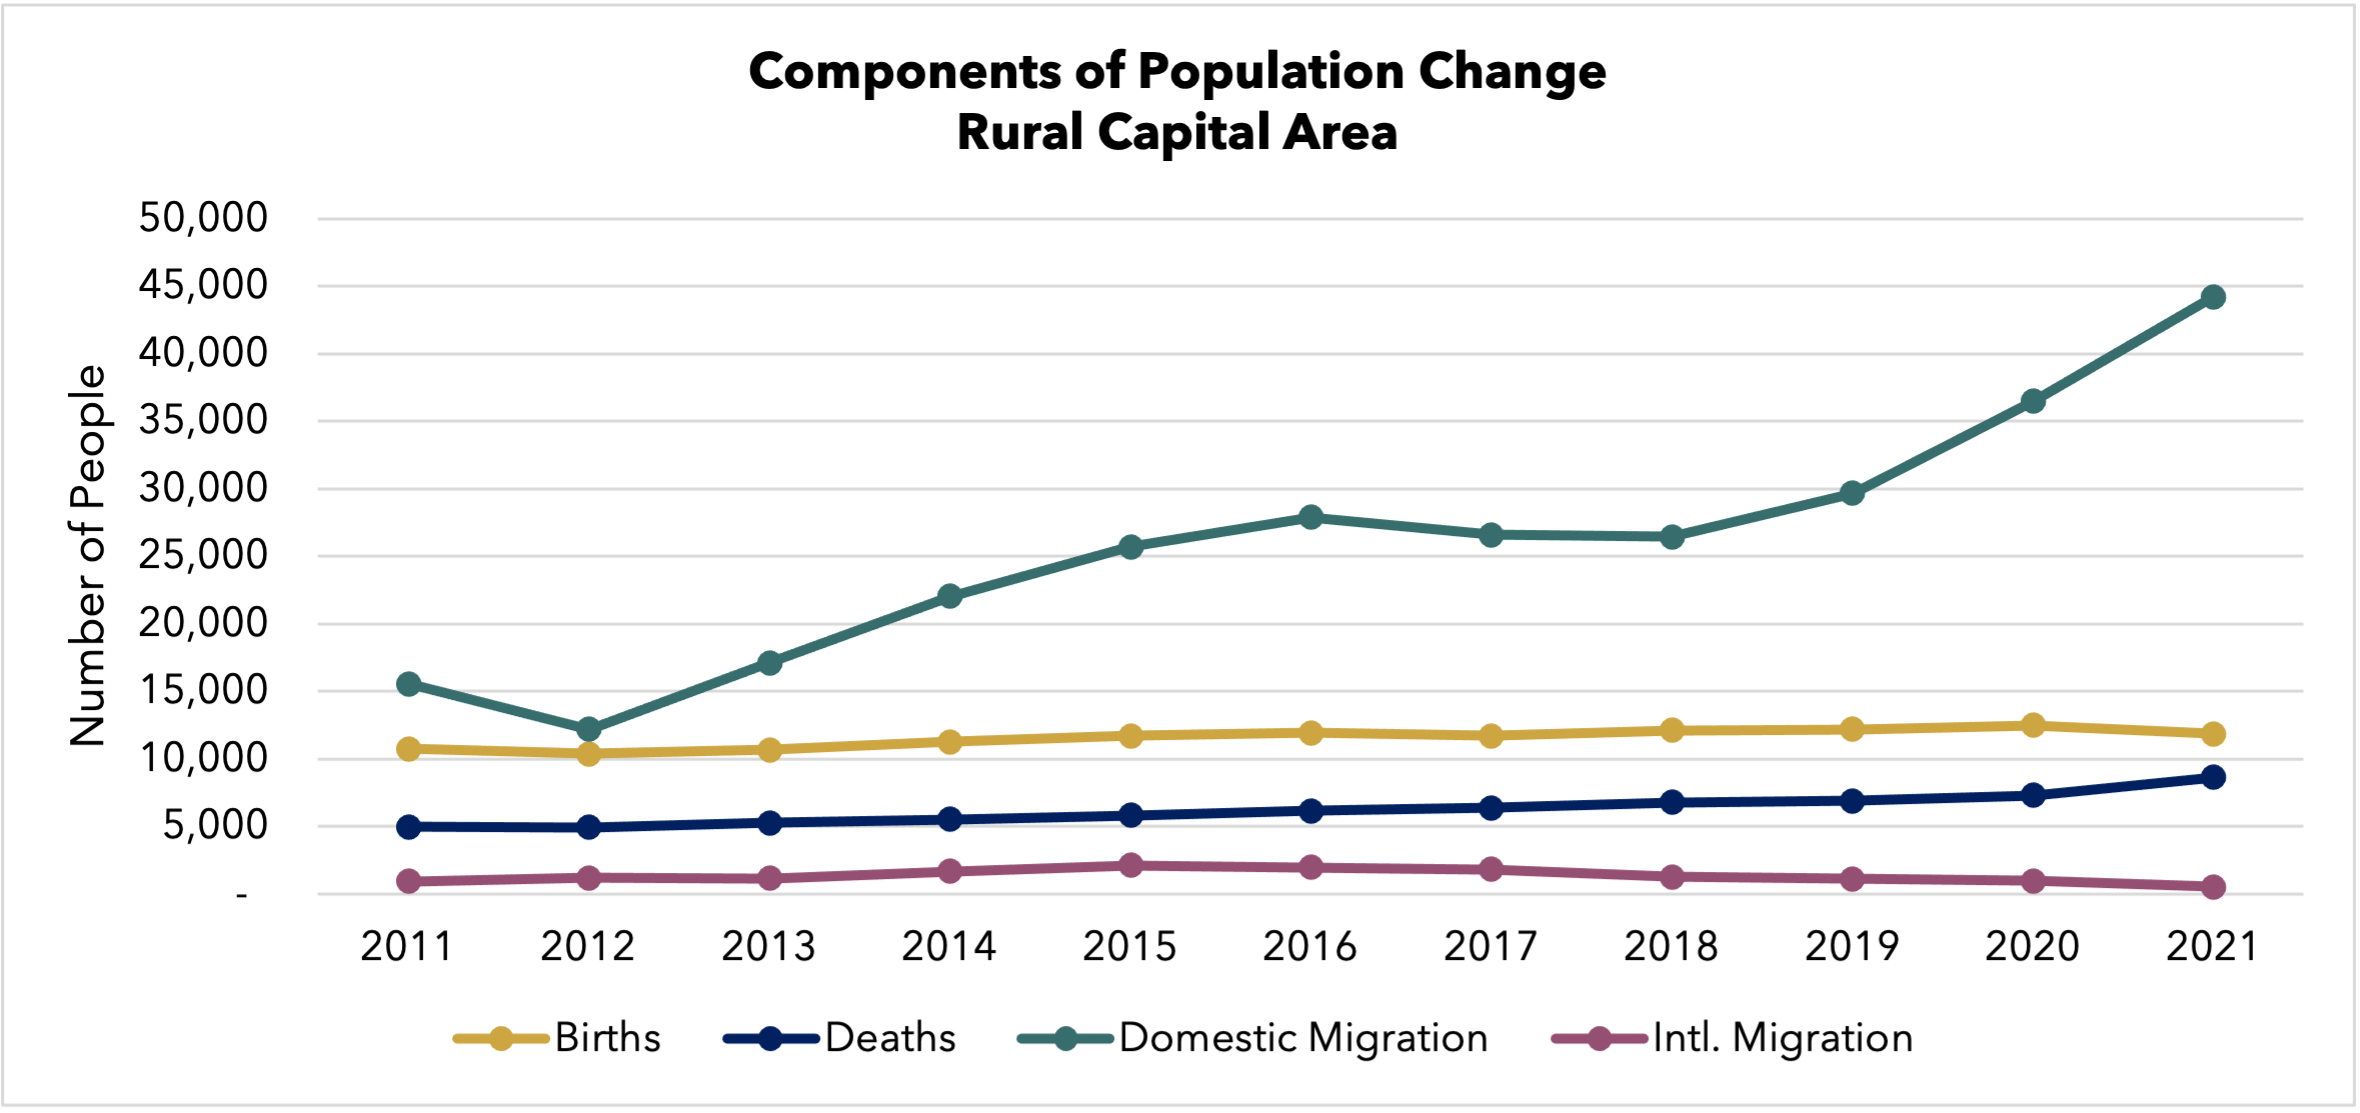 Rural Capital Area Components of Population Change 2021